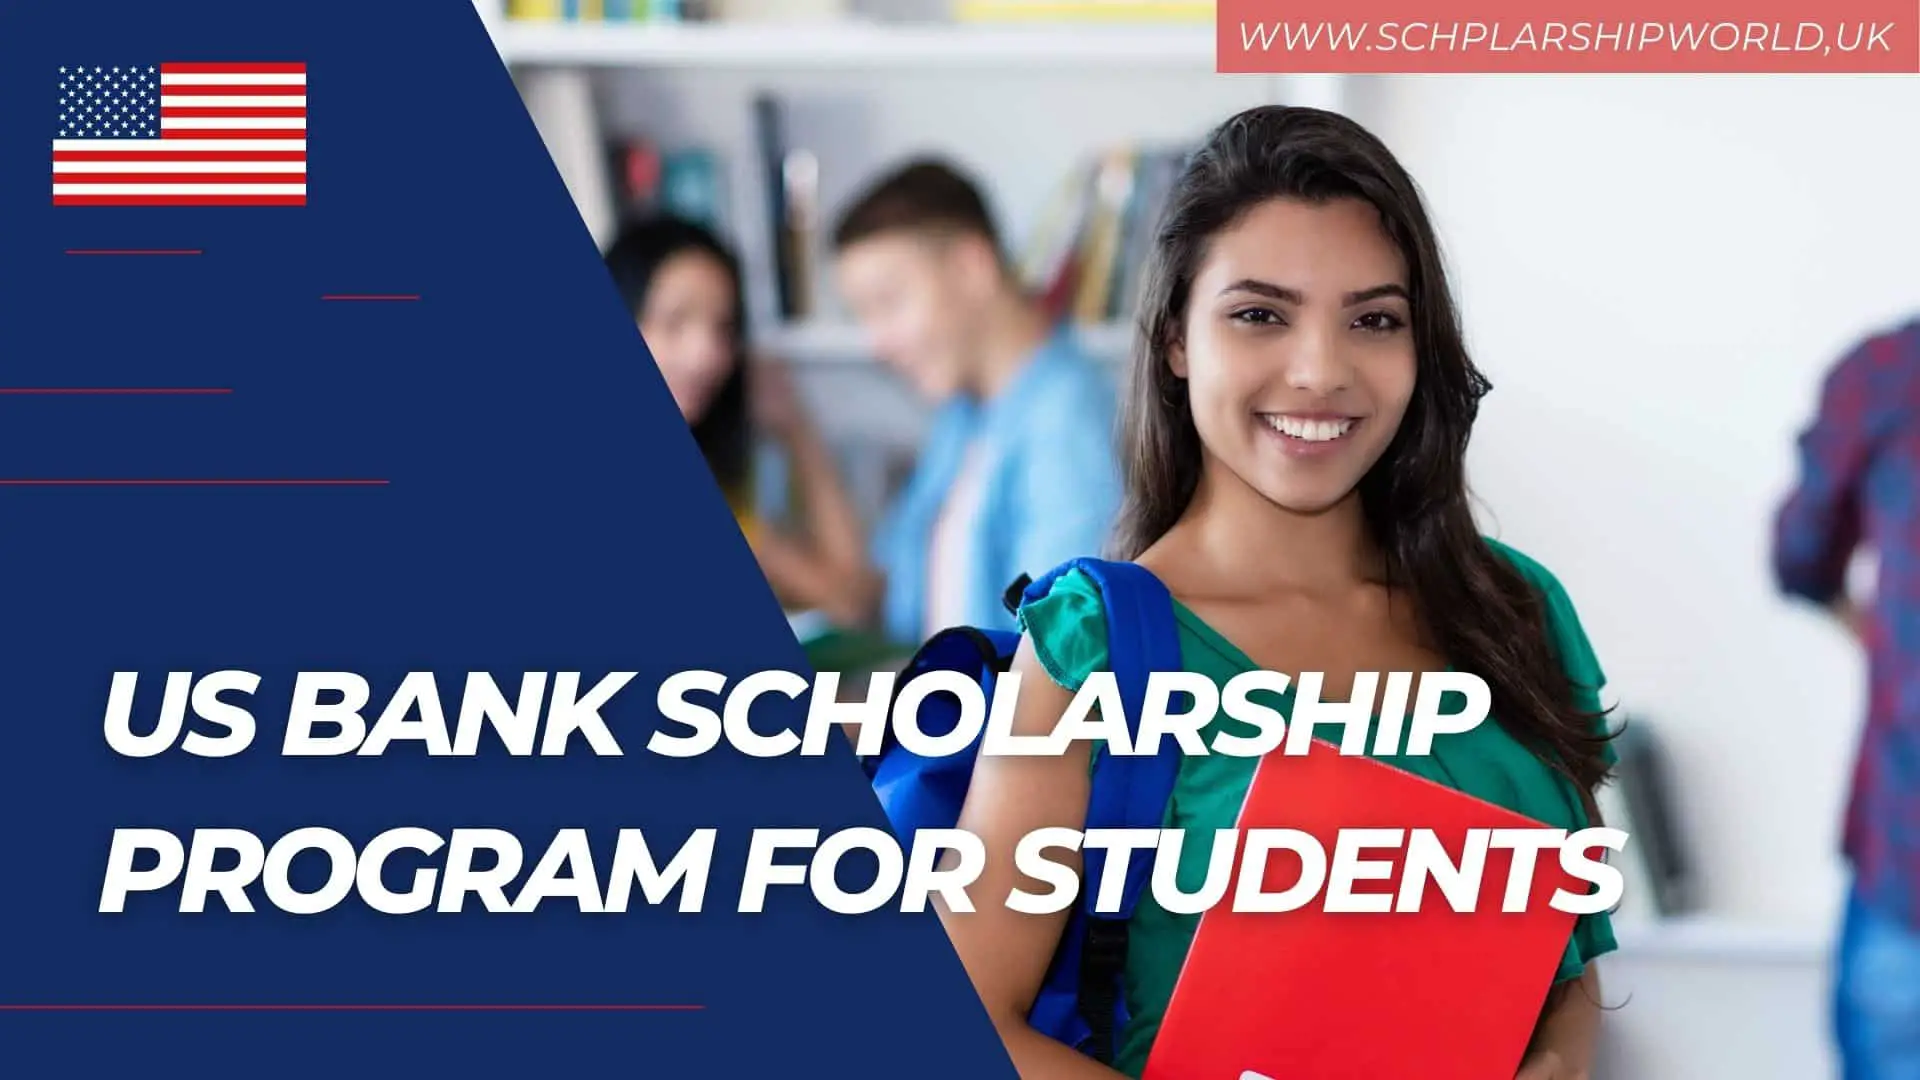 APPLY NOW: US Bank Scholarship Program for Students 2022